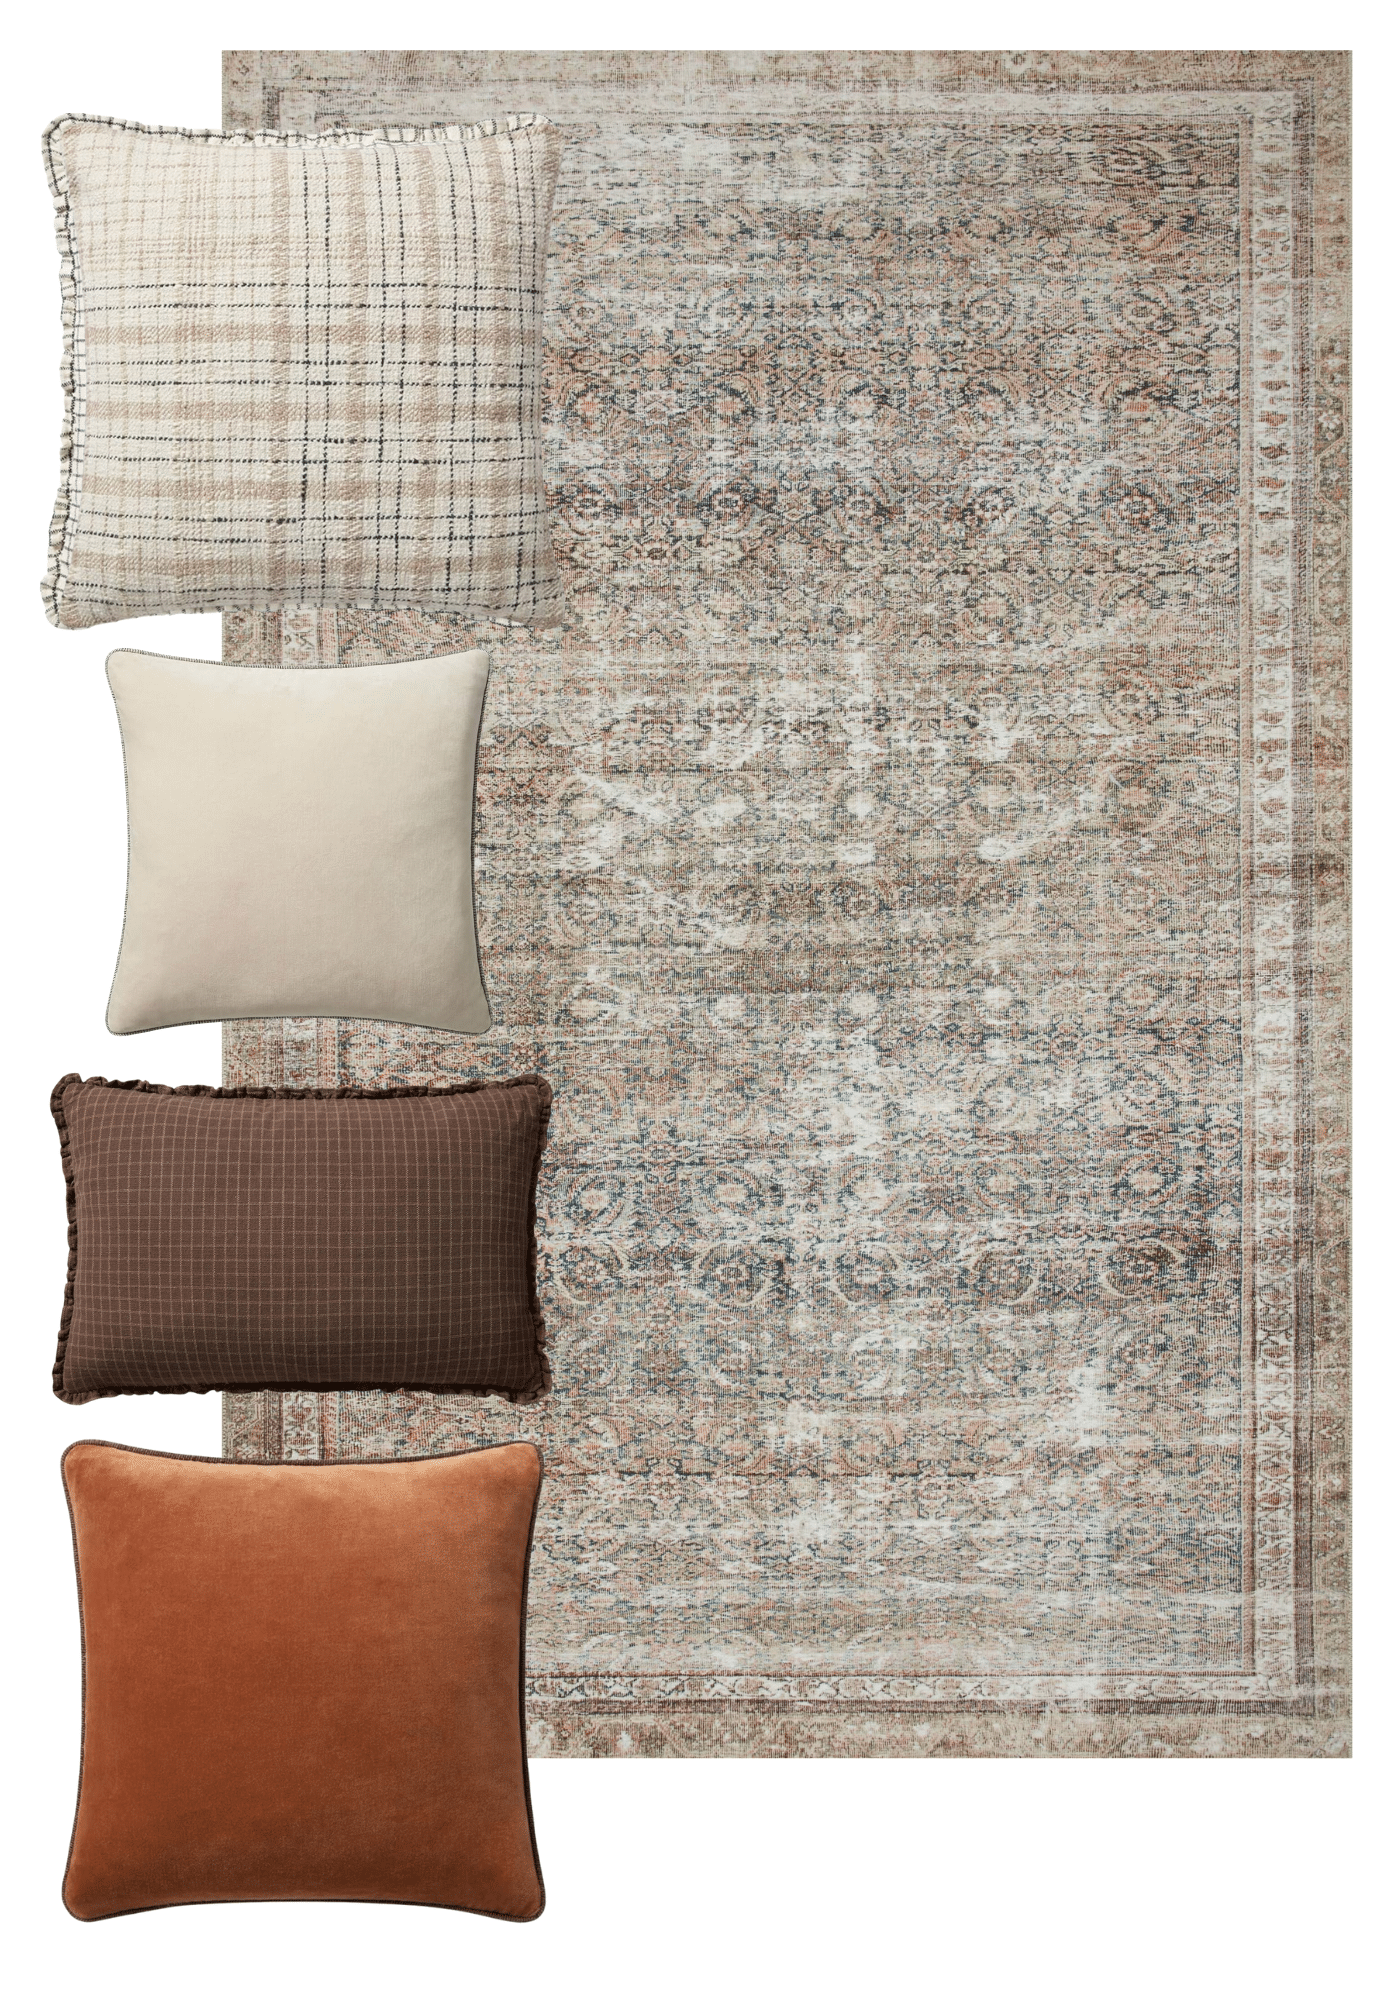 Chris Loves Julia | My Favorite Pillow & Rug Pairings | Jules Rug in Ink/Terracotta with Pillows